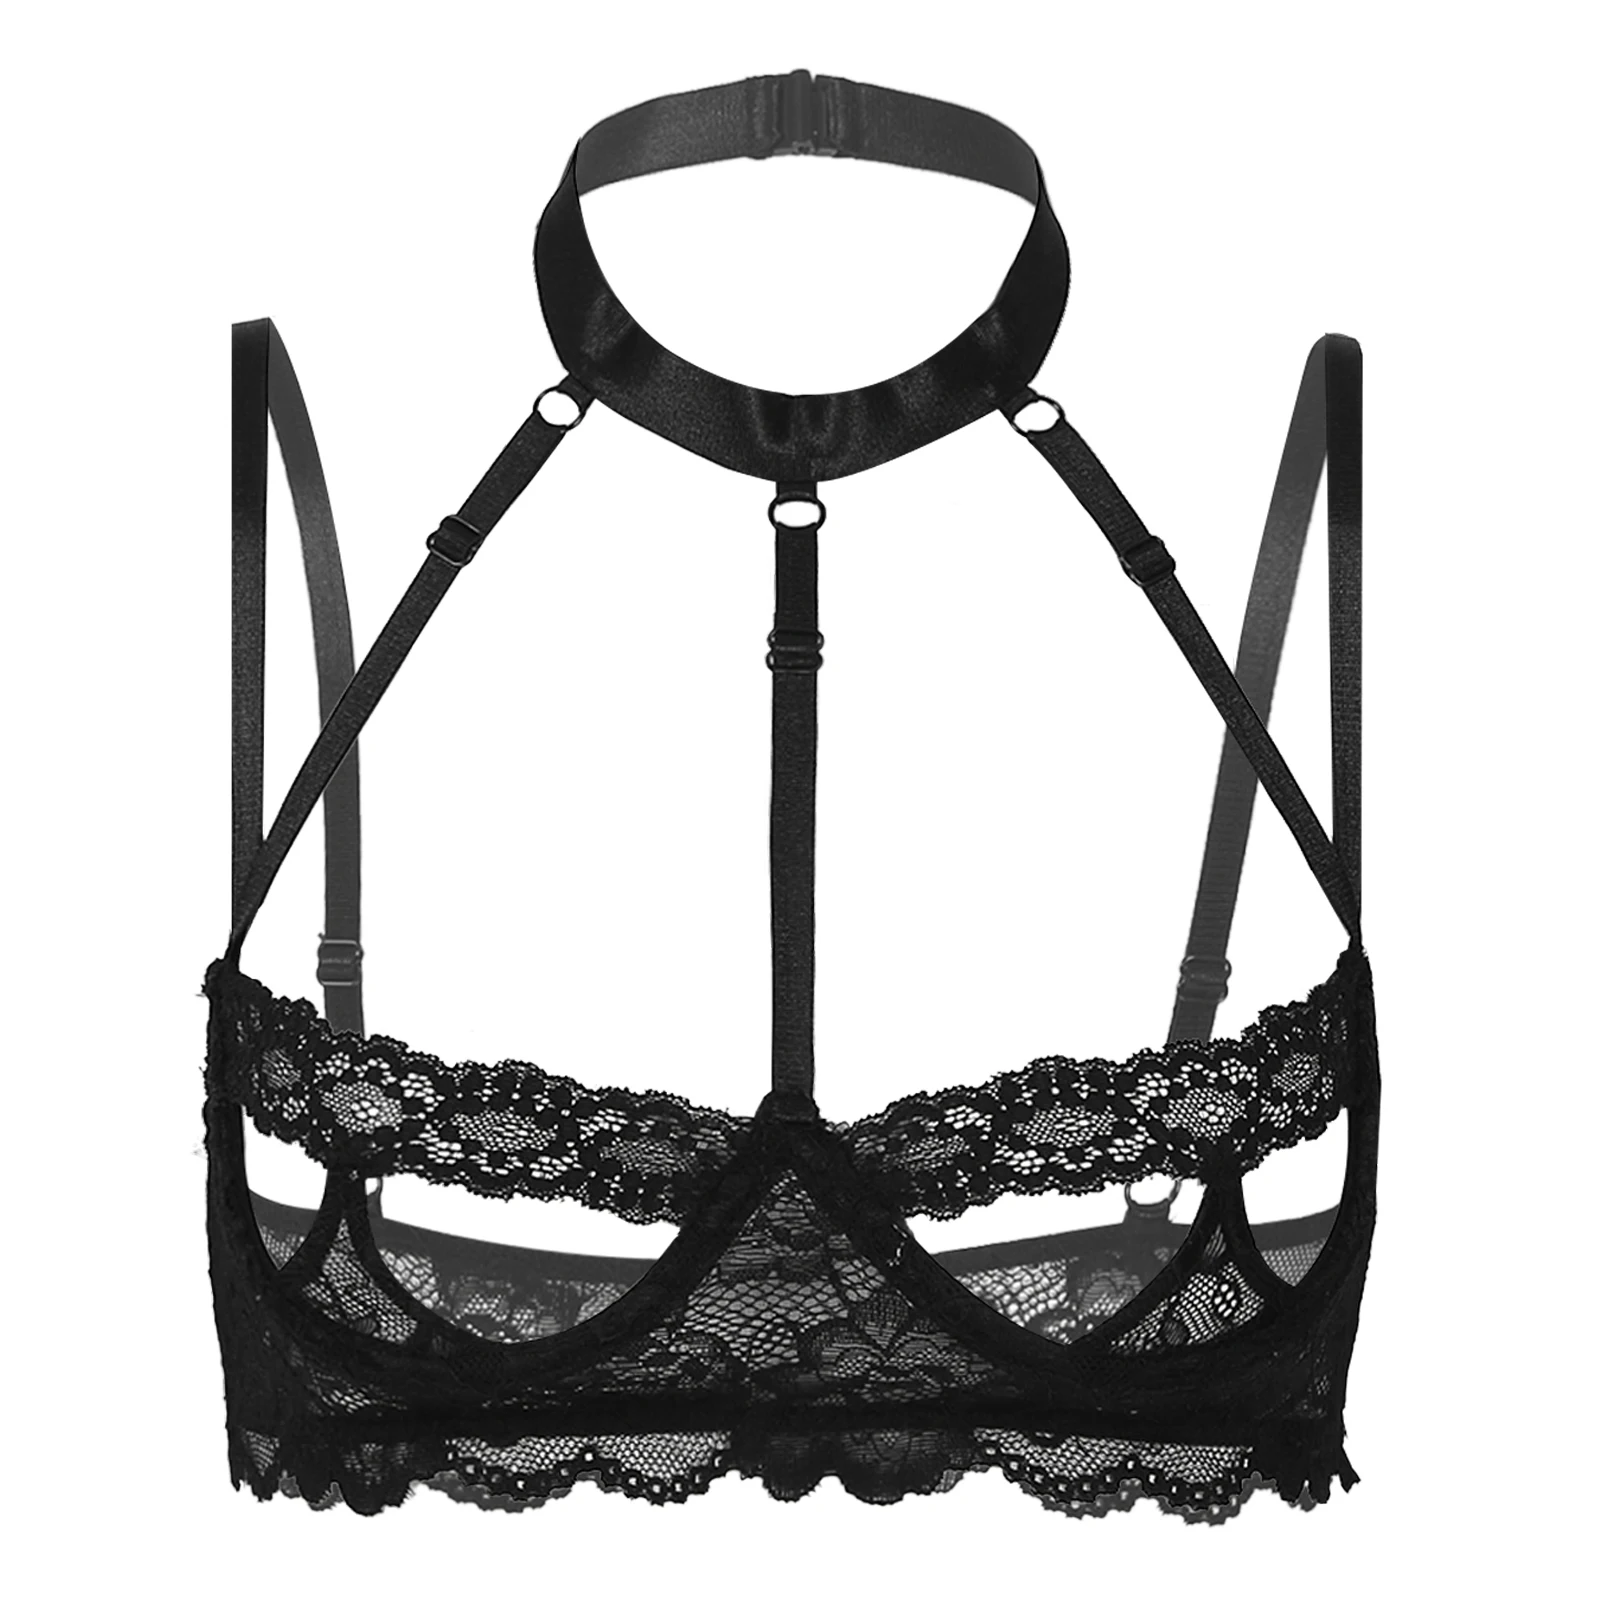 

Women Halter Strappy Sheer Lace Brassiere Tops Lingerie Underwear Ladies Sexy Hollow Out Unlined Bra Underwired